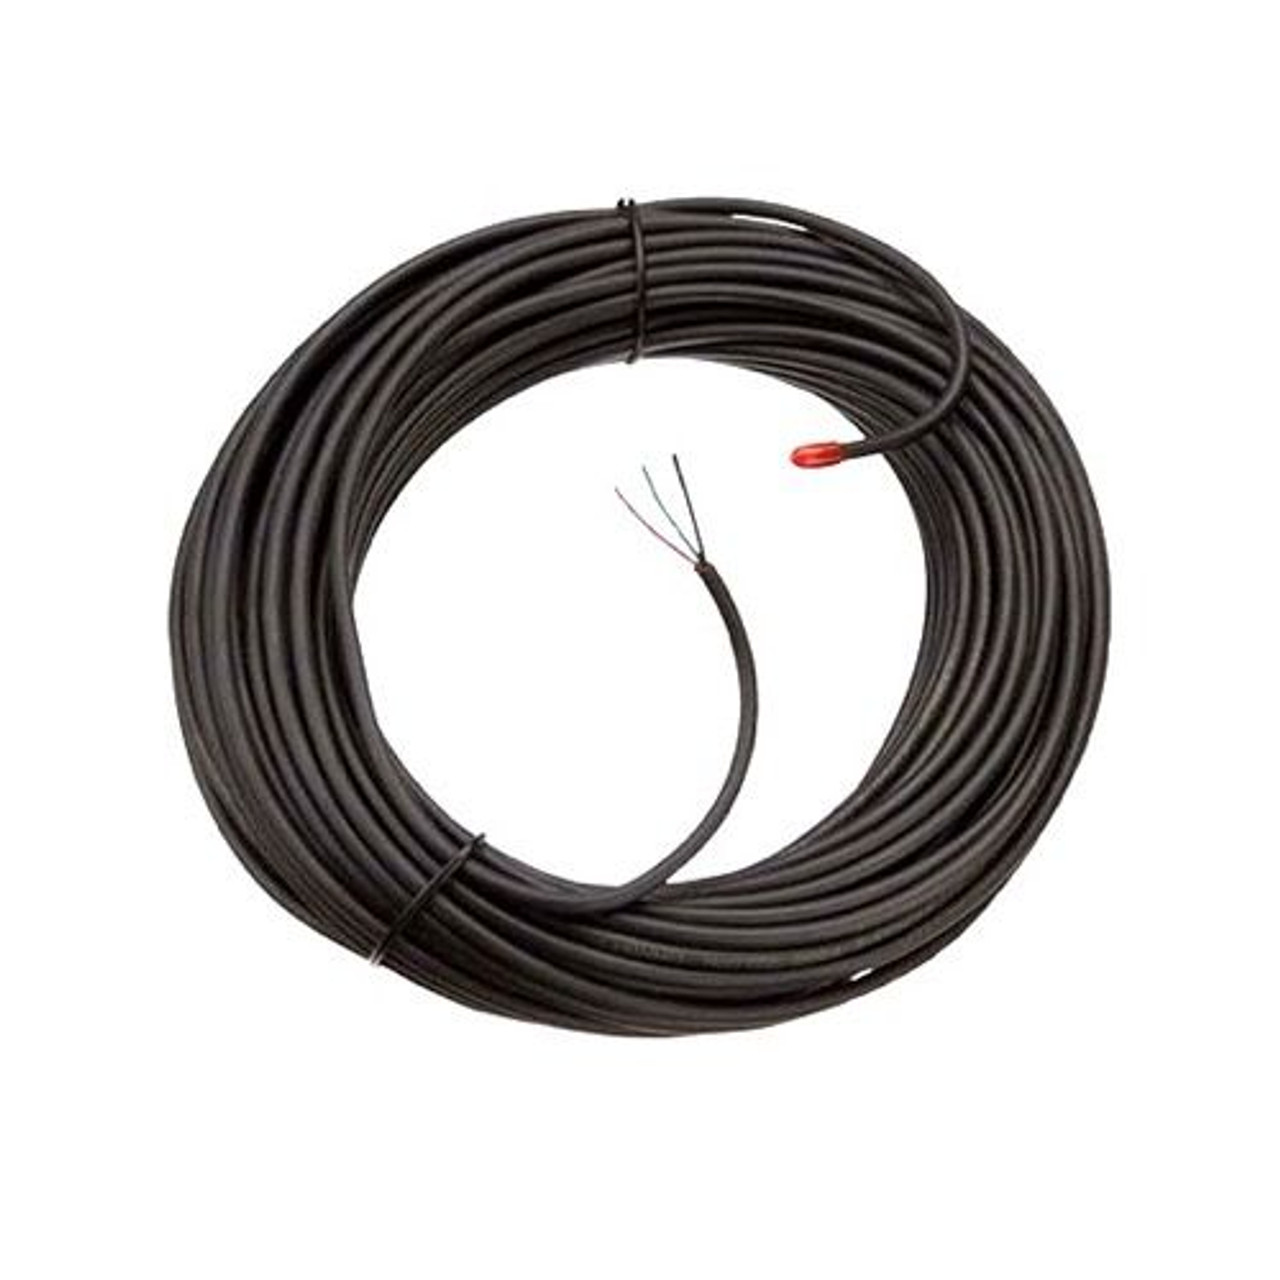 Rotor Control Wire Automatic Antenna Cable Conductor 100' FT Bulk Roll Heavy Duty TV Aerial Rotator Cable HDTV Antenna Wire